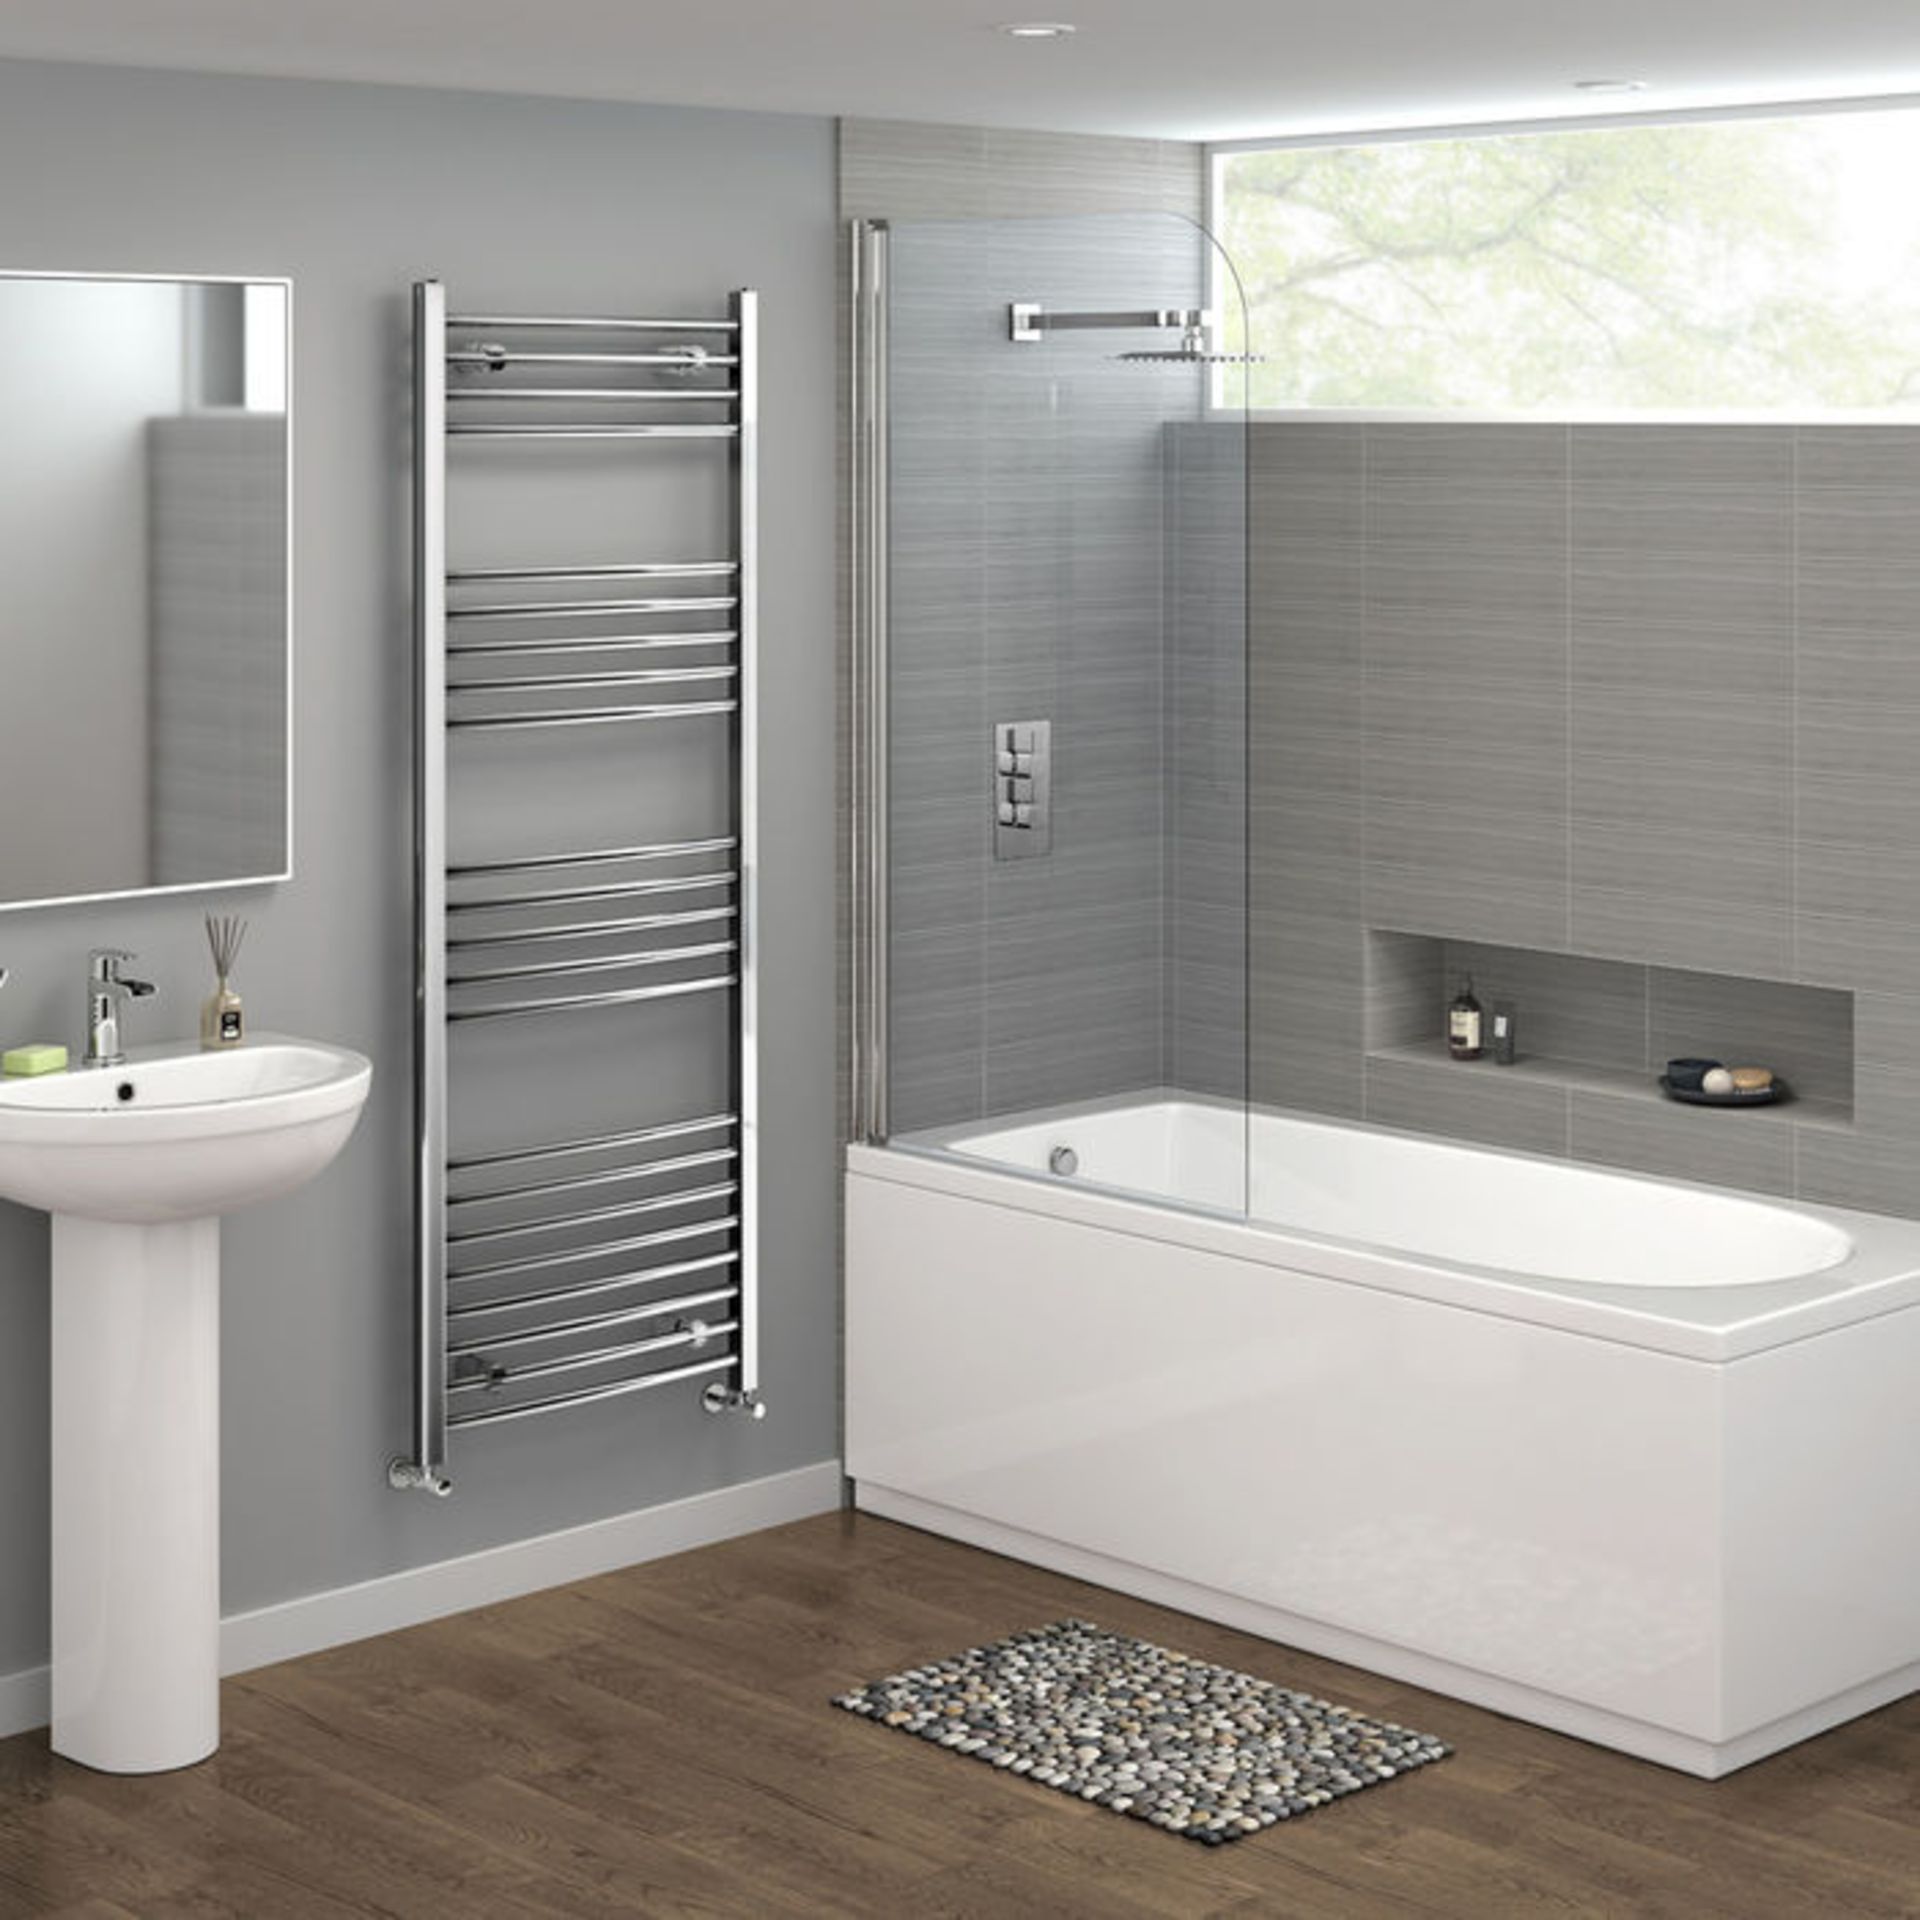 (OS222) 1600x600mm - 20mm Tubes - Chrome Curved Rail Ladder Towel Radiator. Made from chrome - Image 2 of 4